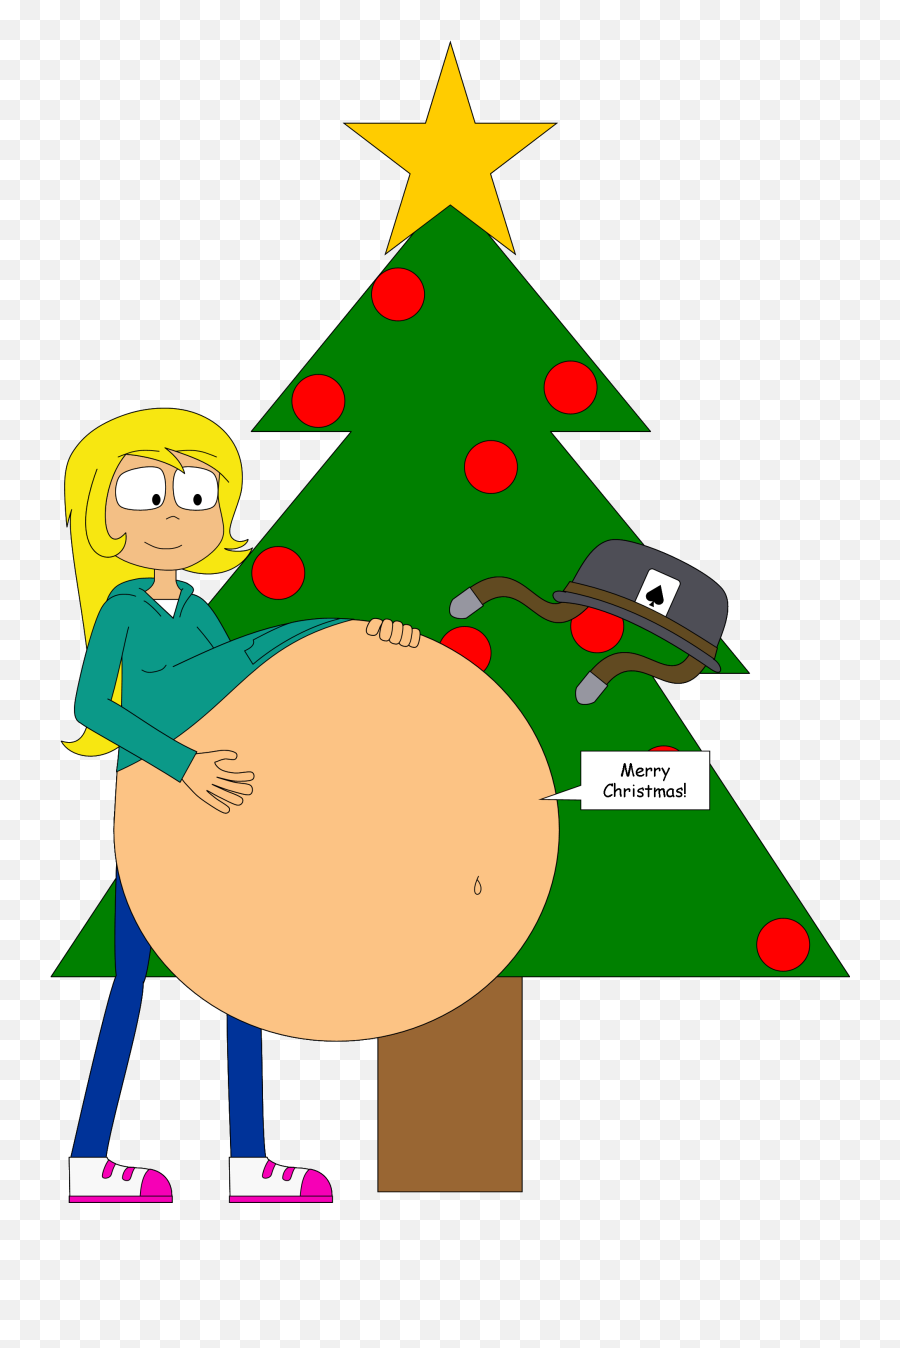 Angry Signs 45 3 A Christmas With Girlsvoreboys By - Vore Angry Signs Gwen Emoji,Christmas Eve Clipart